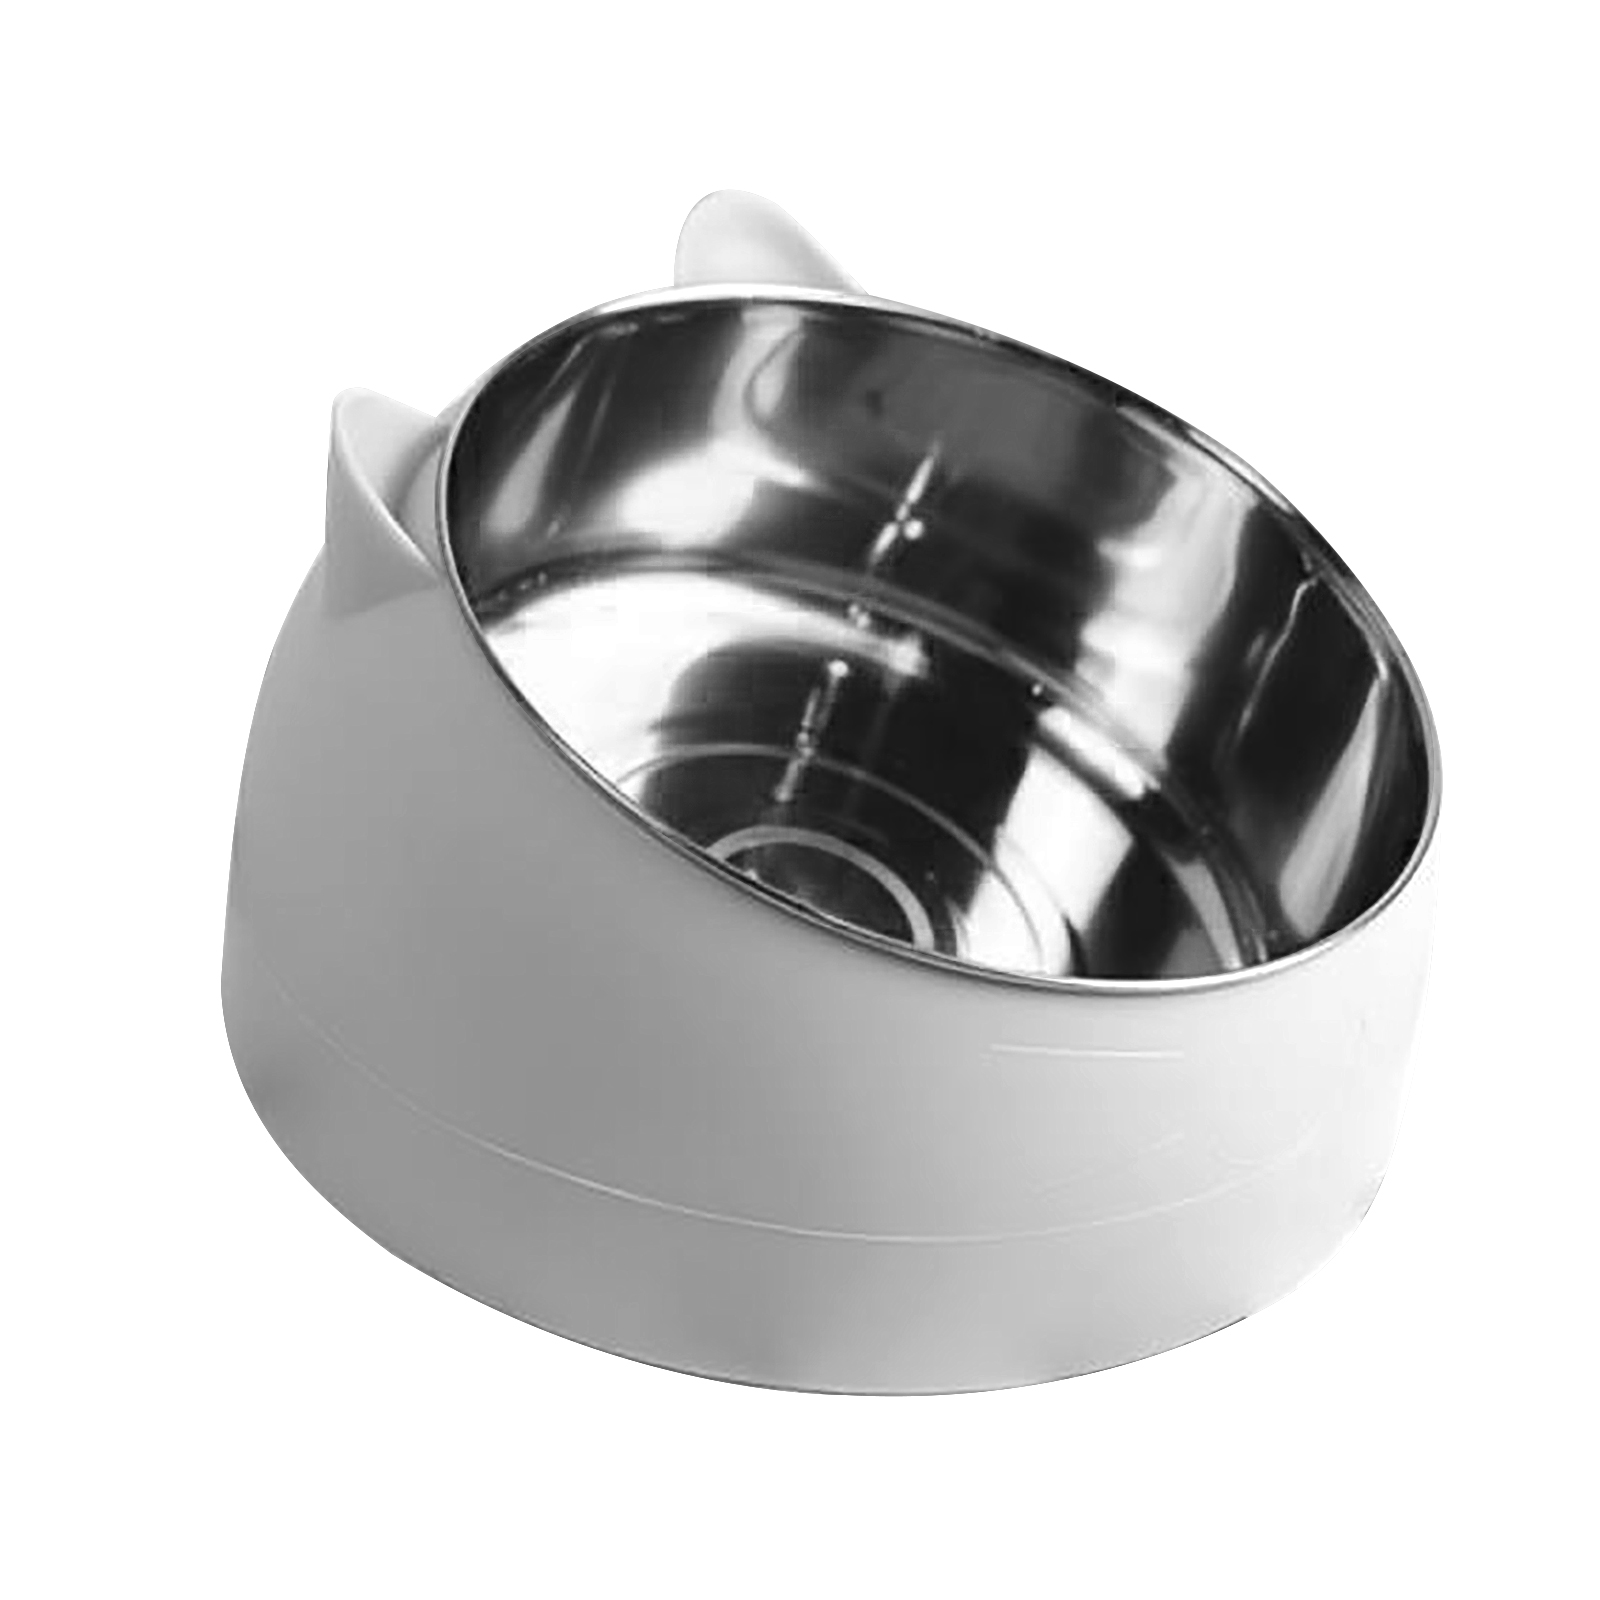 Pet Heating Bowl Cat Thermostatic Bowl Heating Dog Bowl Cat Bowl Chickens Pet Supplies Dogs Adjustable Cat Food Bowl - image 1 of 9